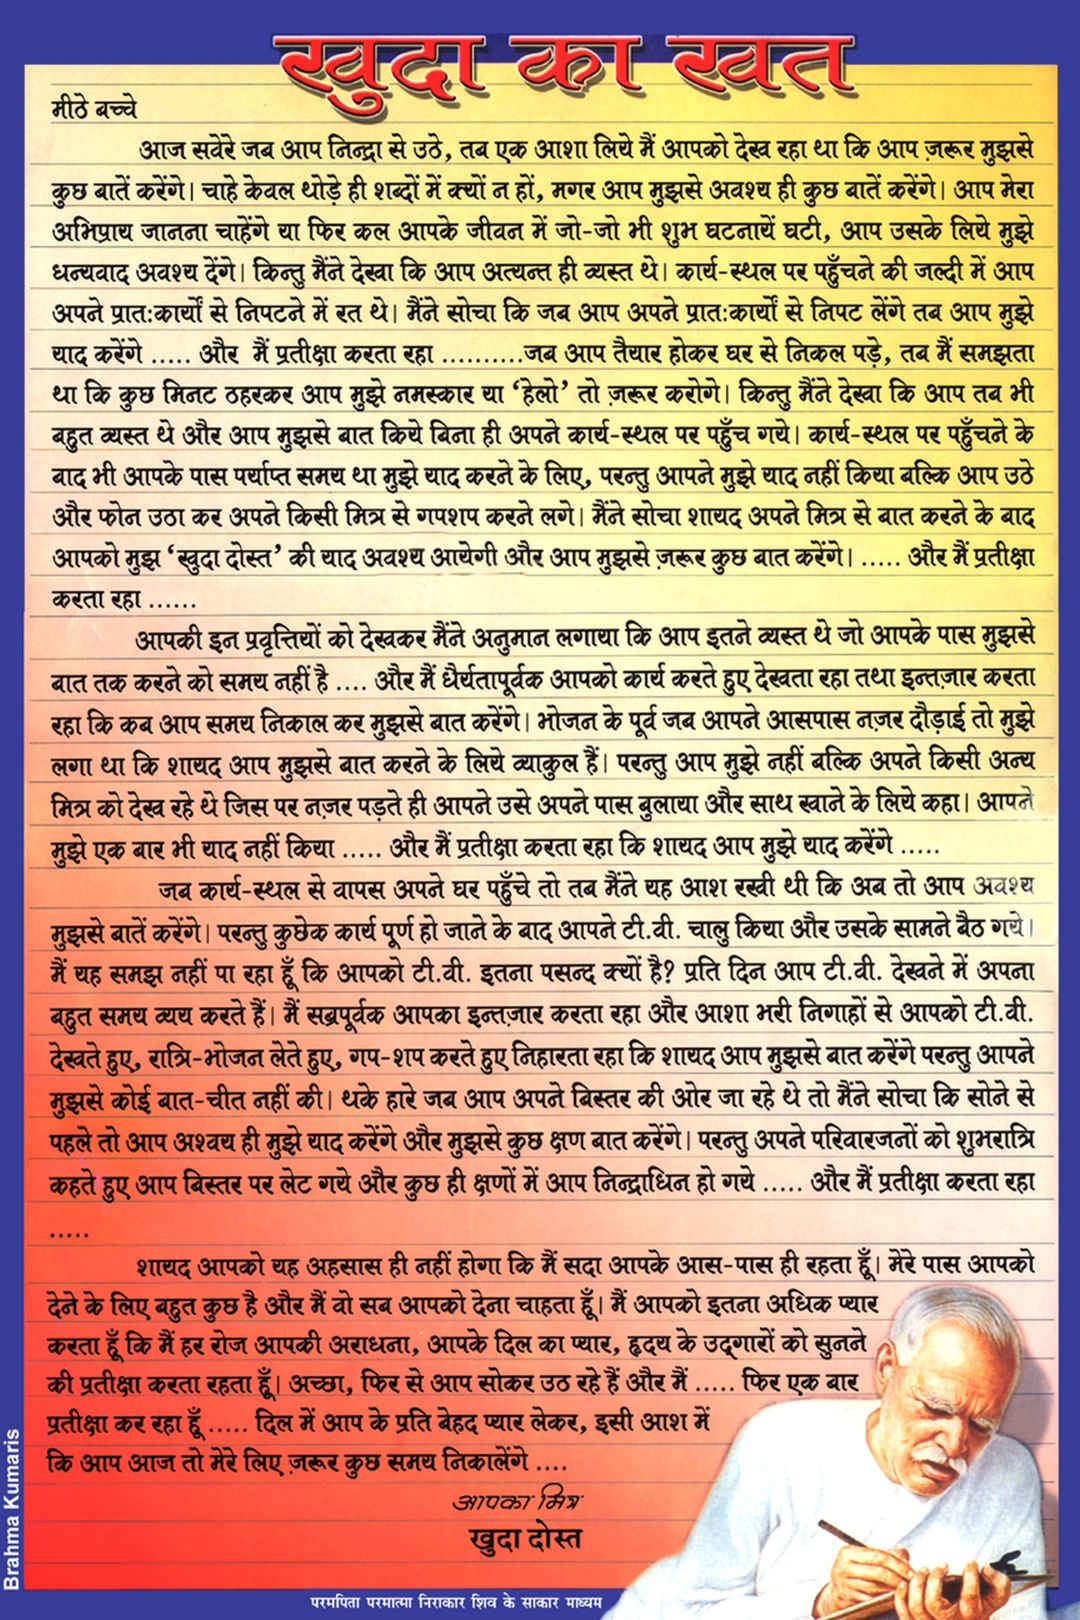 Letter from god (hindi)